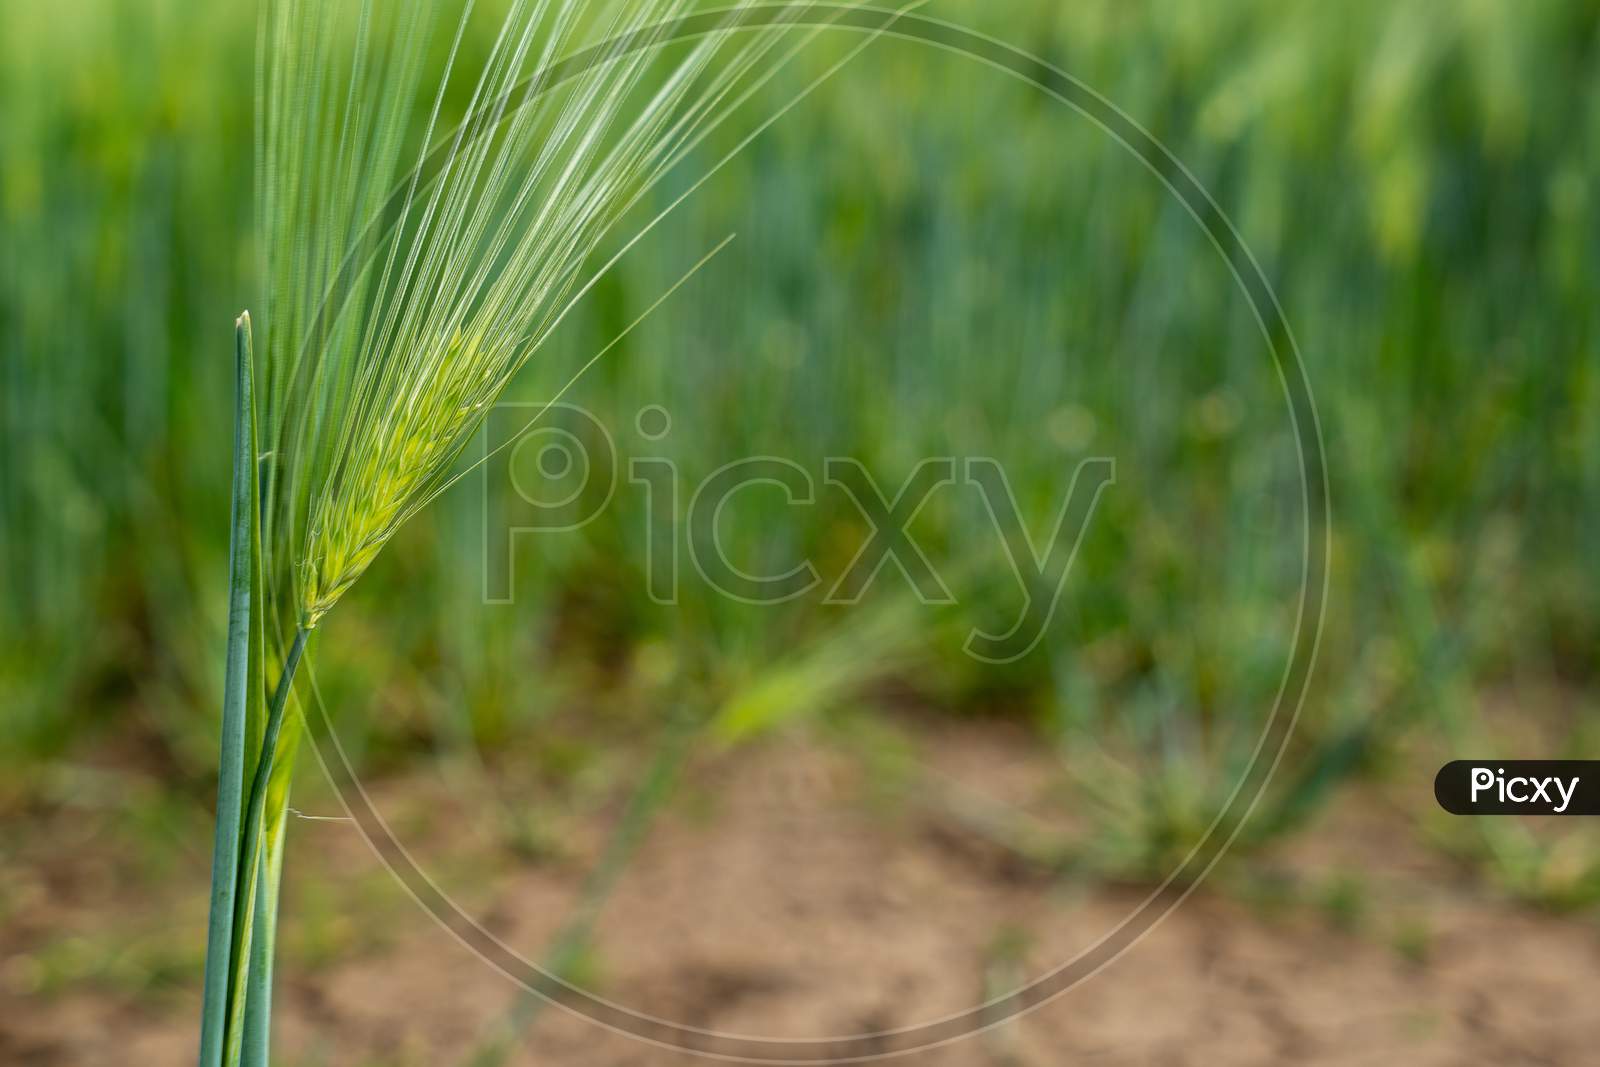 Ripening Bearded Barley On A Bright Summer Day. It Is A Member Of The Grass Family, Is A Major Cereal Grain Grown In Temperate Climates Globally.